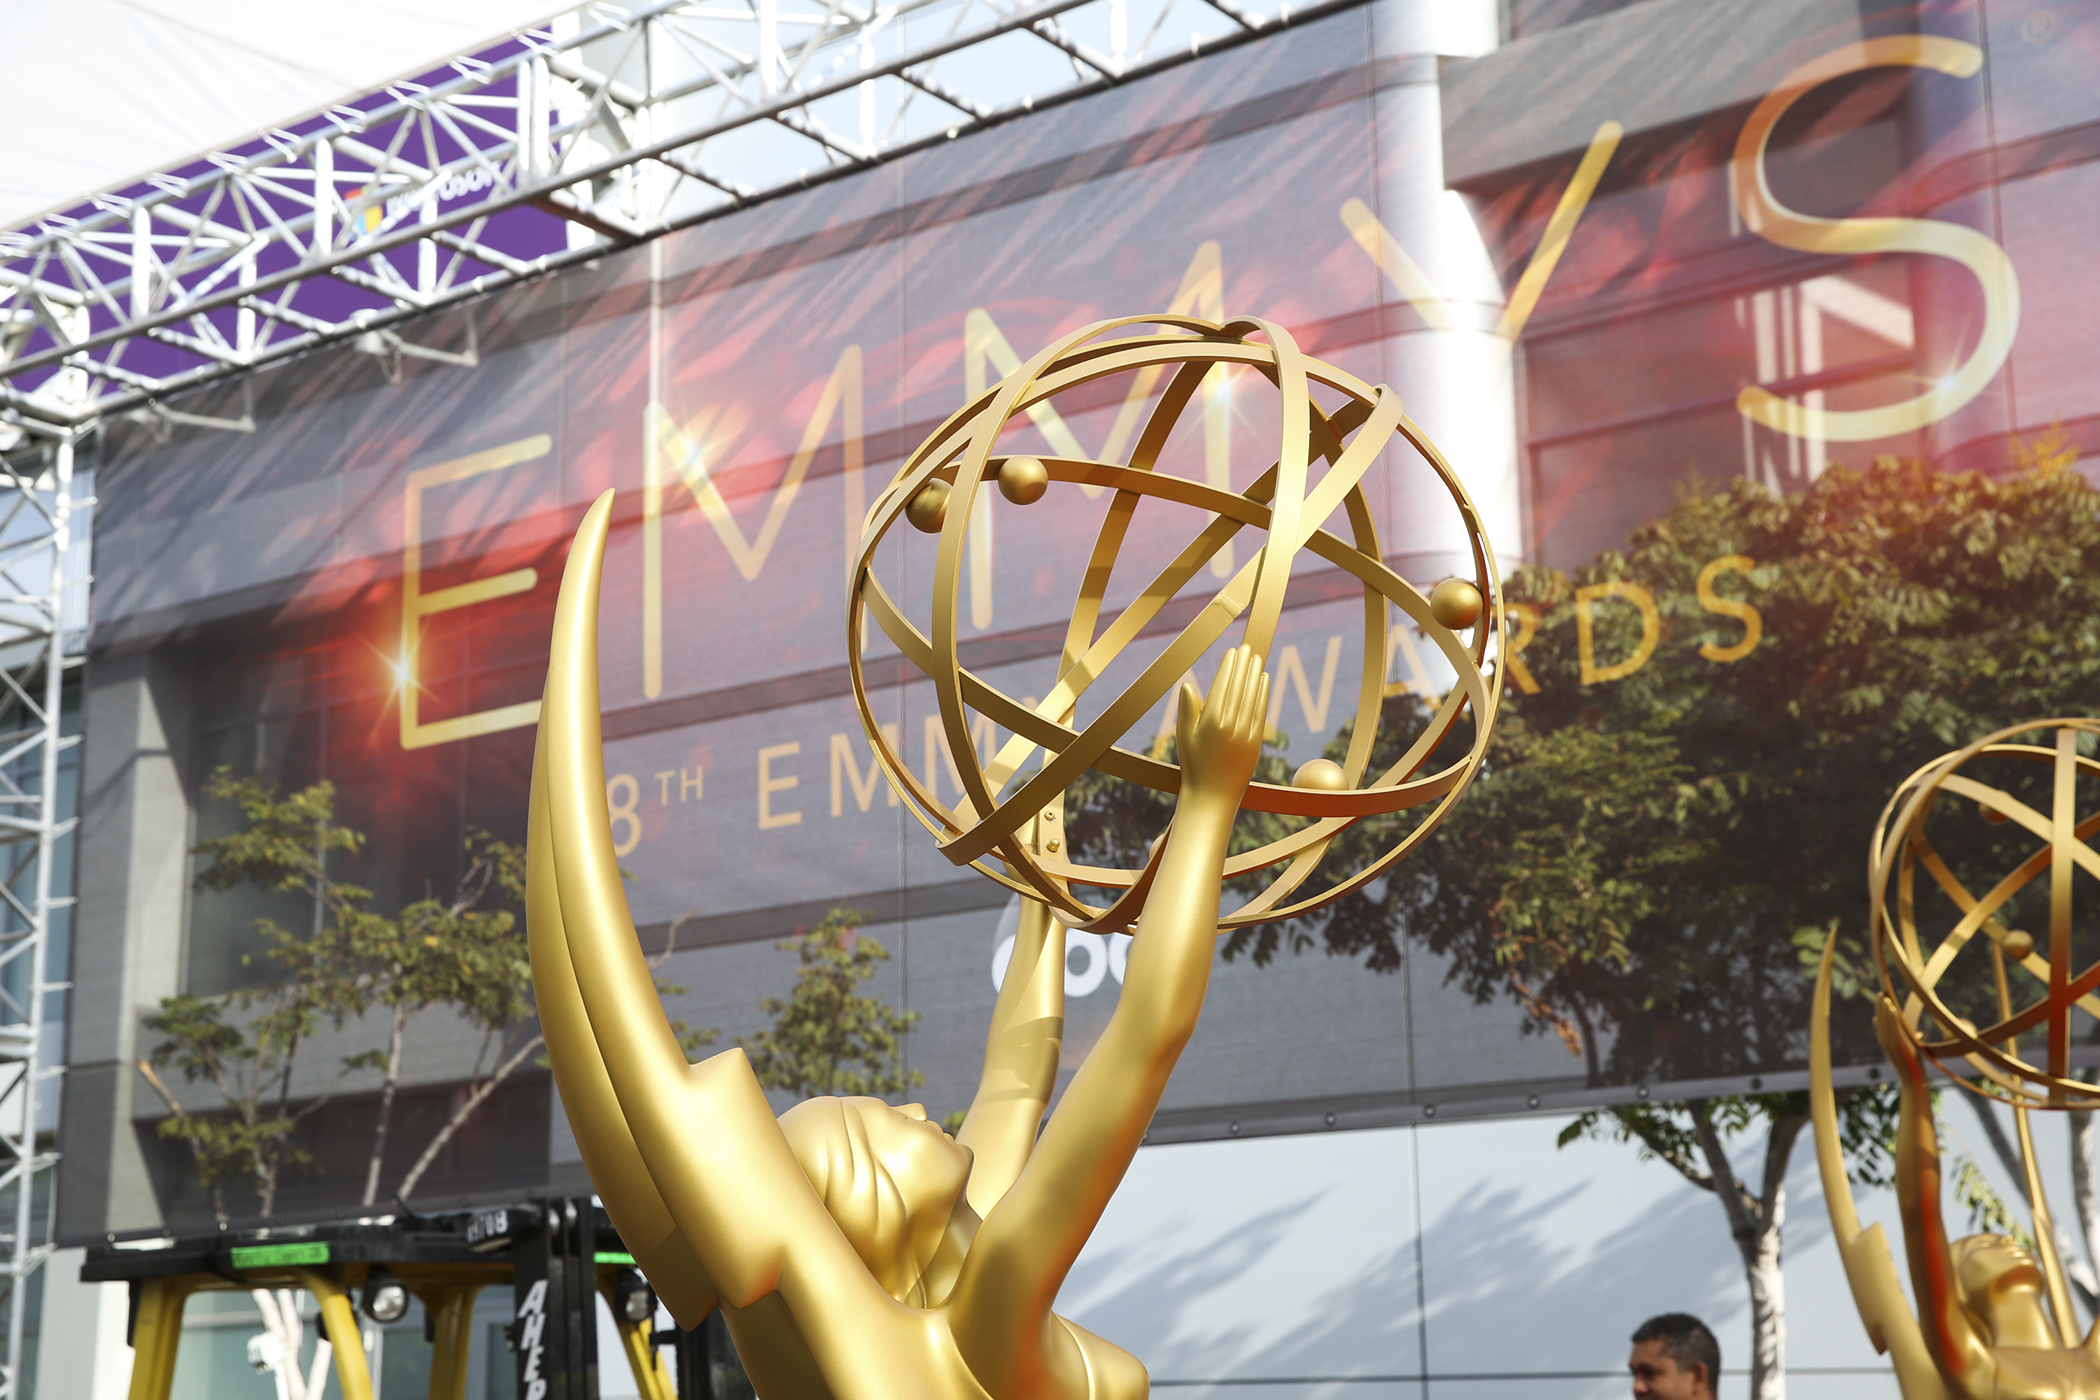 Emmy statues appear at the 2016 Primetime Emmy Awards Press Preview Day at the Microsoft Theater on Wednesday, Sept. 14, 2016, in Los Angeles.